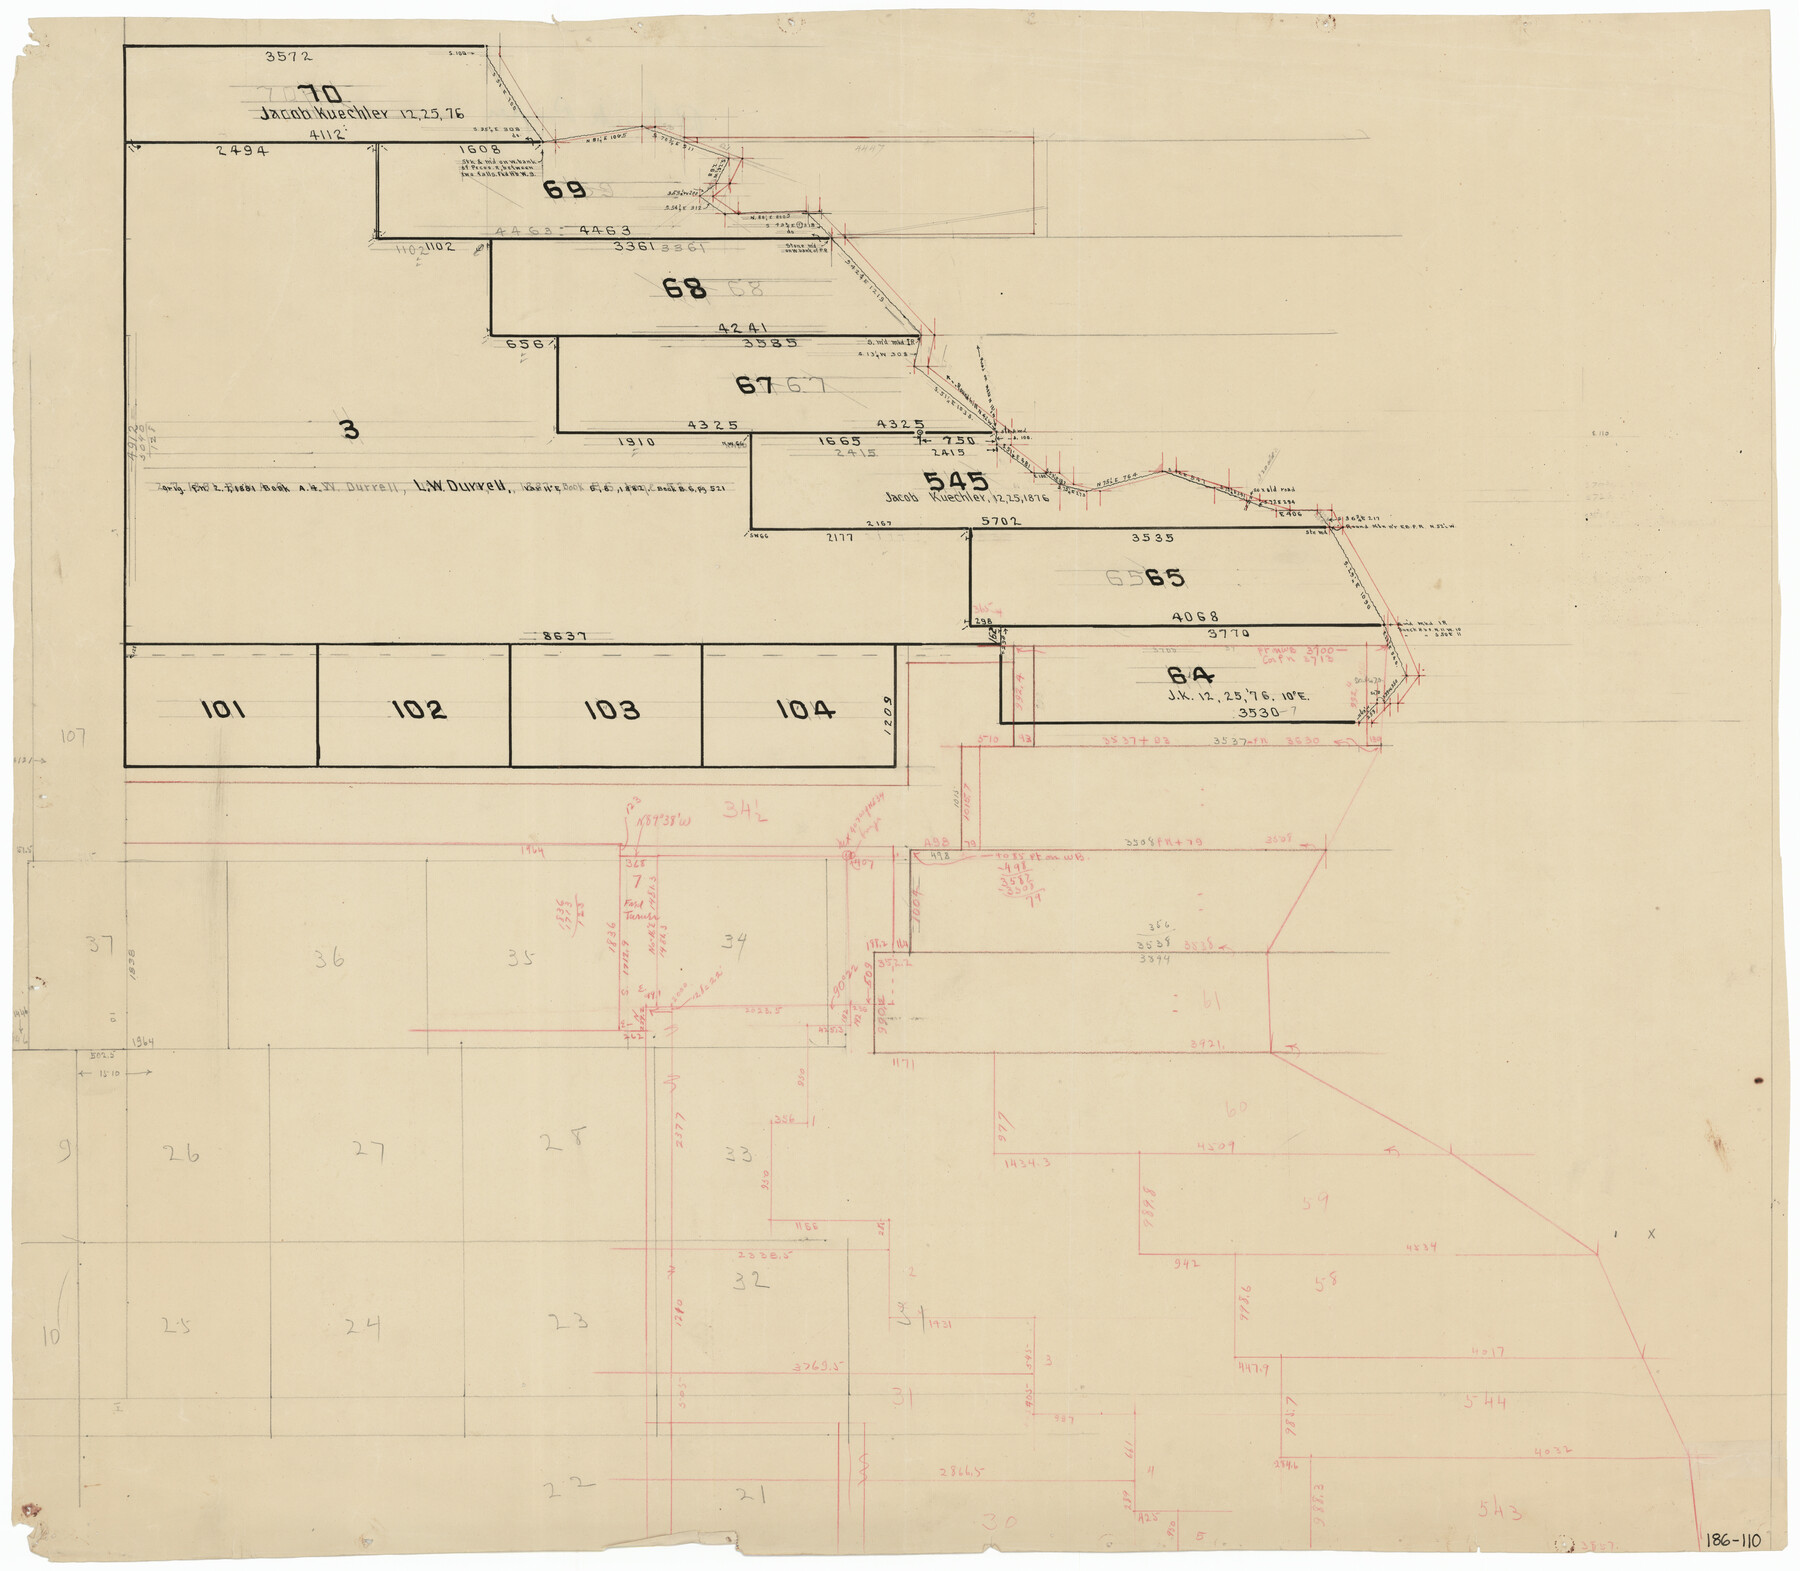 91632, [Sections 58-70, I. & G. N. Block 1, Runnels County School Land and part of Block 194], Twichell Survey Records